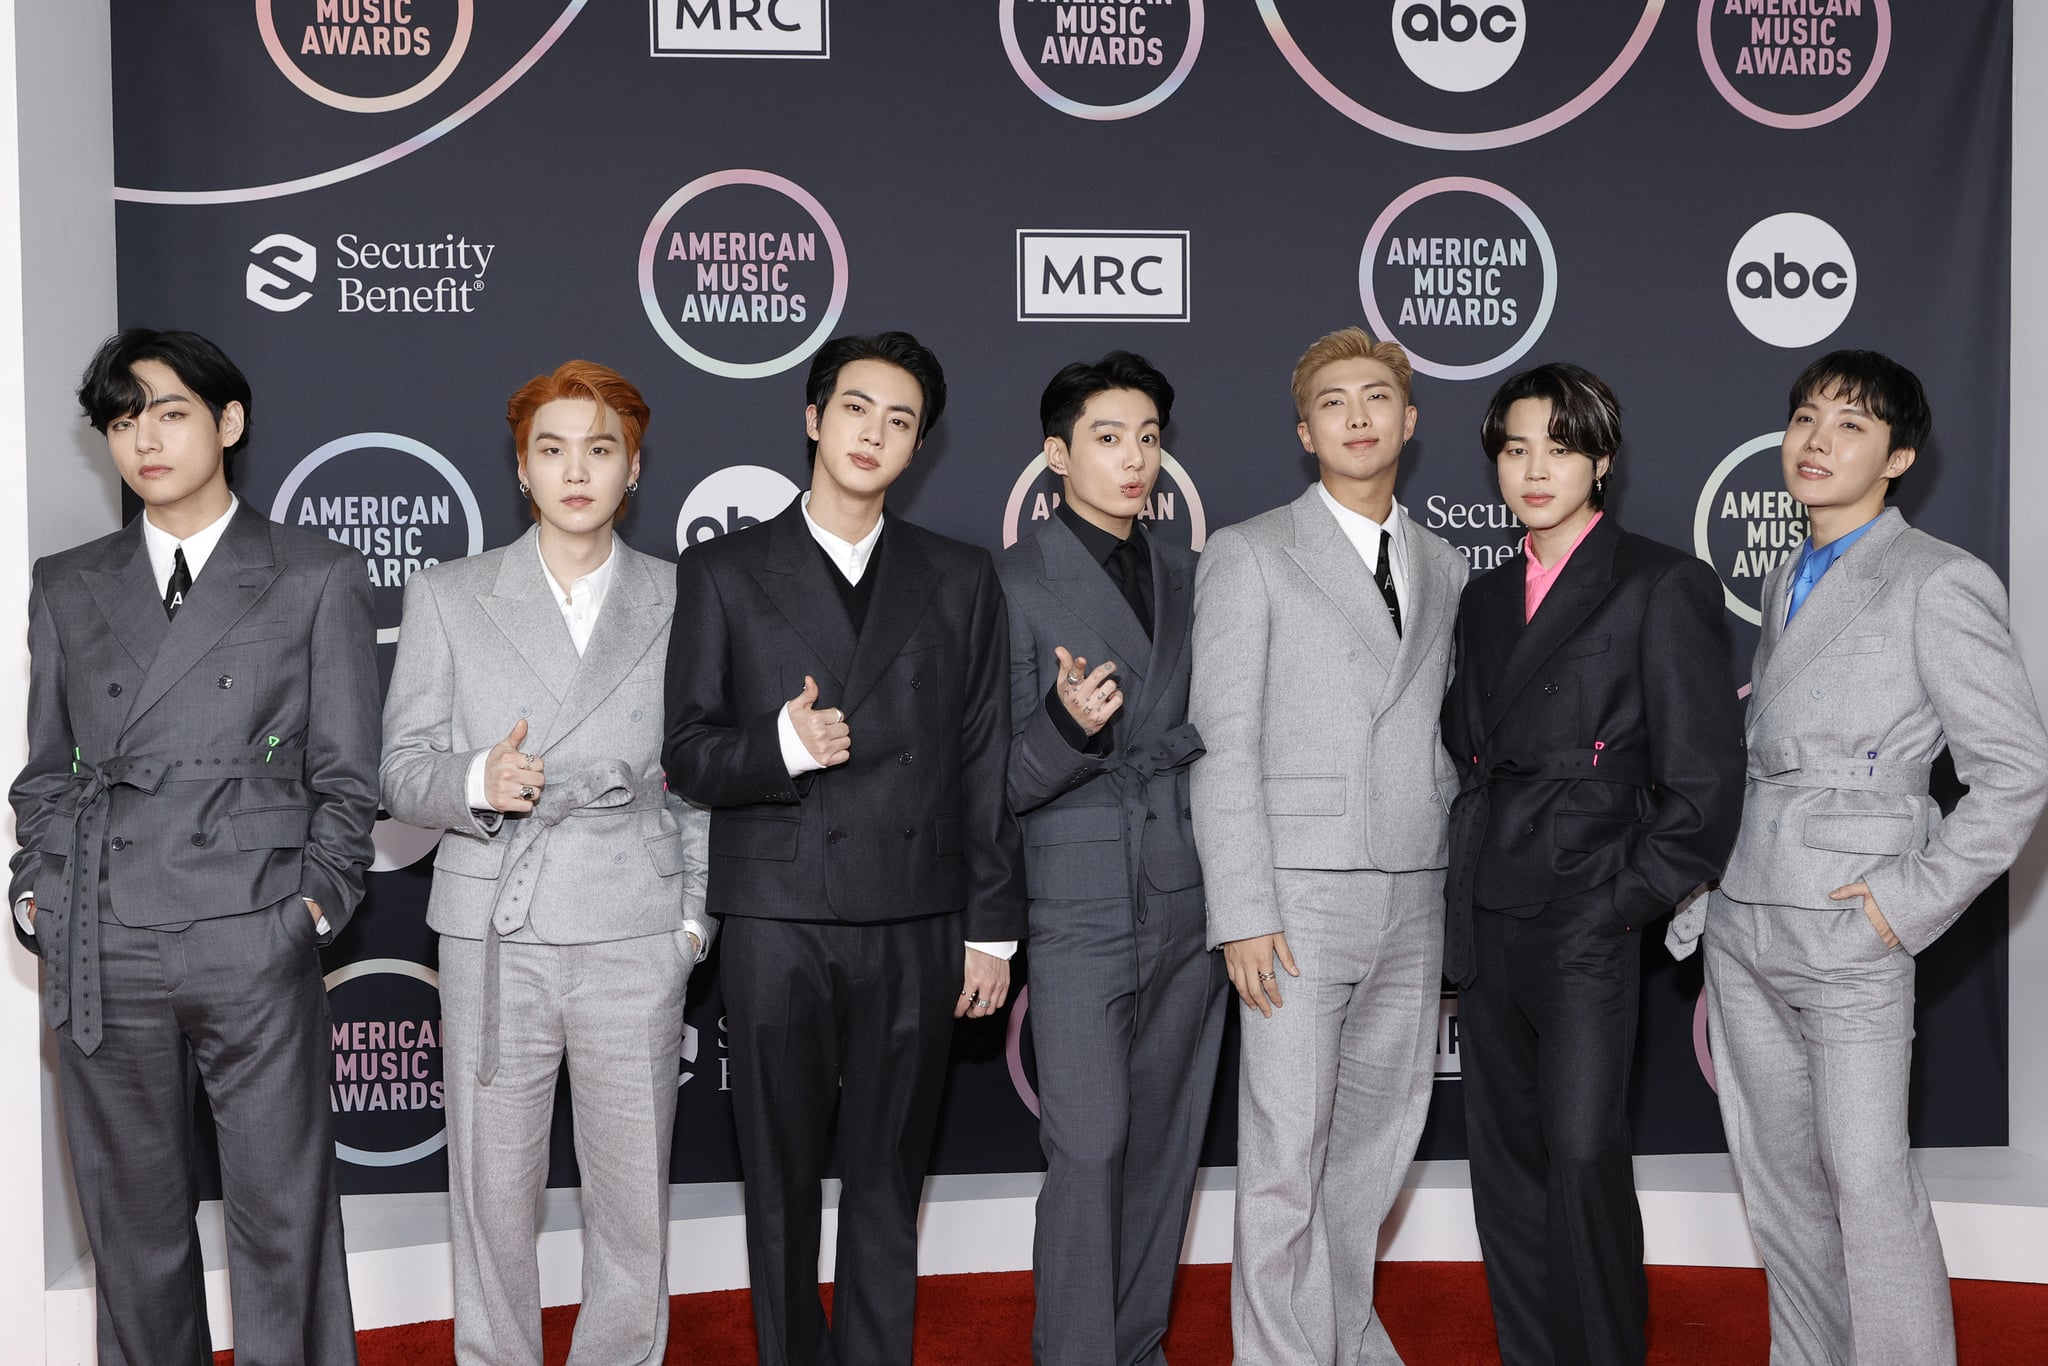 LOS ANGELES, CALIFORNIA - NOVEMBER 21: (L-R) V, Suga, Jin, Jungkook, RM, Jimin, and J-Hope of BTS attend the 2021 American Music Awards at Microsoft Theatre on November 21, 2021 in Los Angeles, California. (Photo by Amy Sussman/Getty Images)